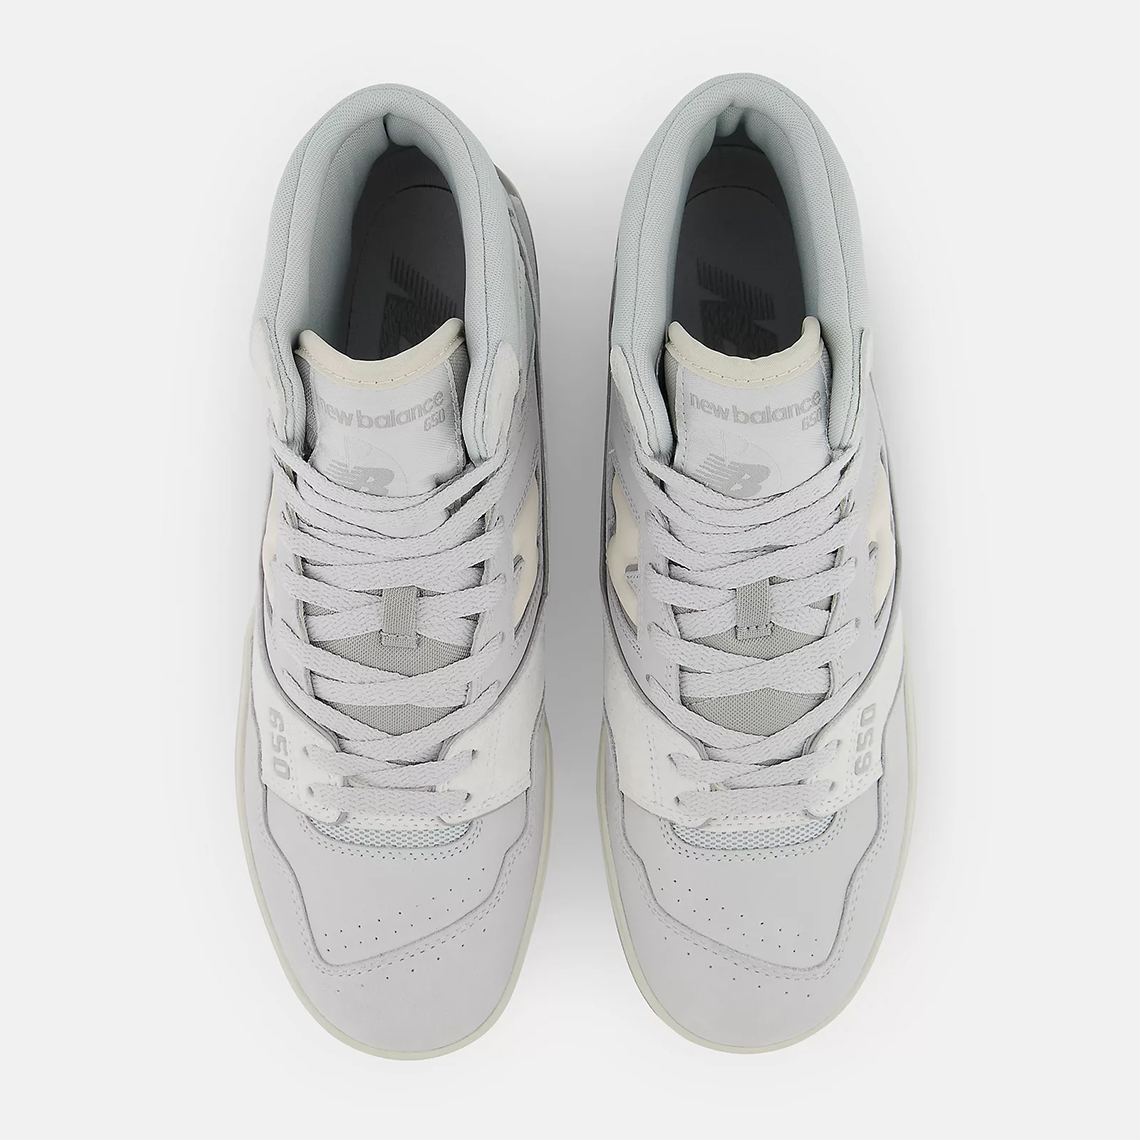 end x new balance m575 marble white available now Light Aluminum Rain Cloud Marblehead Bb650rgg 4